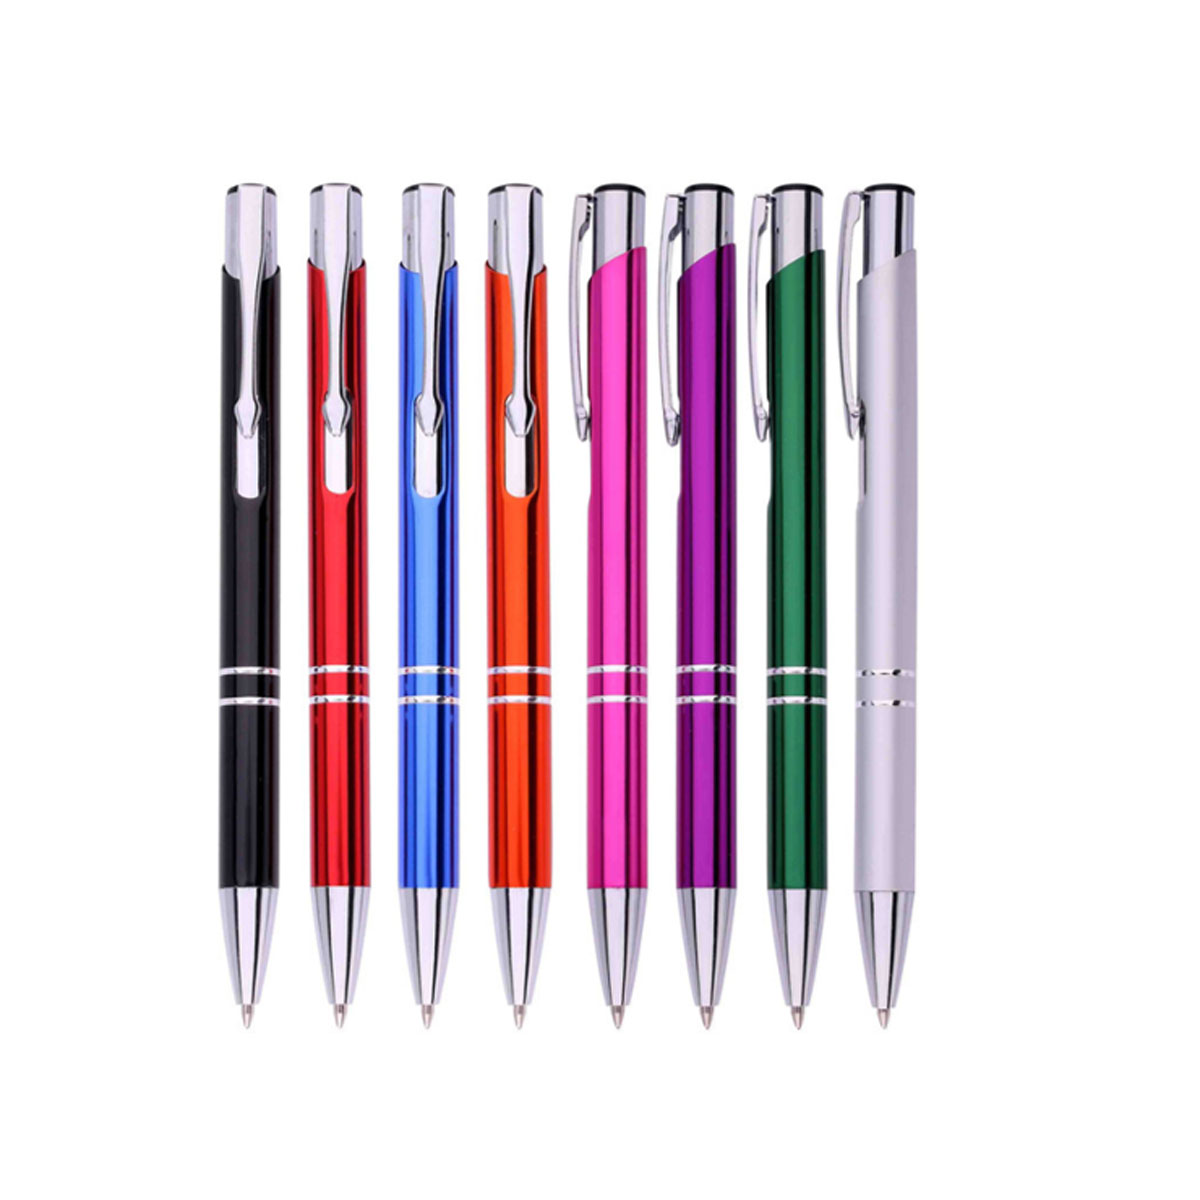 GL-AAD1043 Promotional Metal Pen with Your Logo